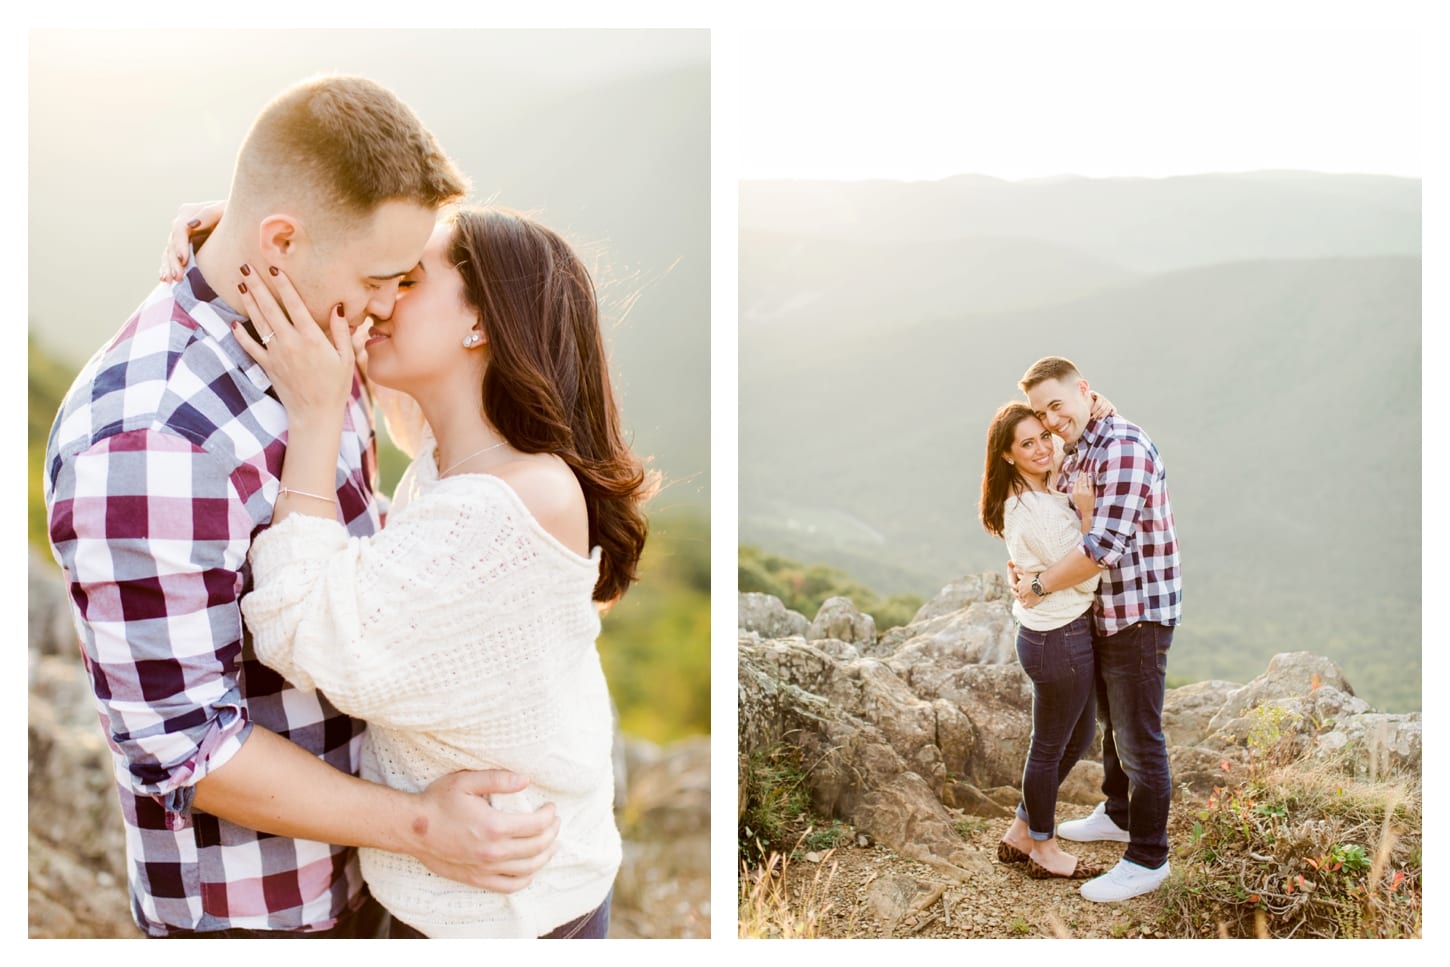 Ravens Roost proposal photographer